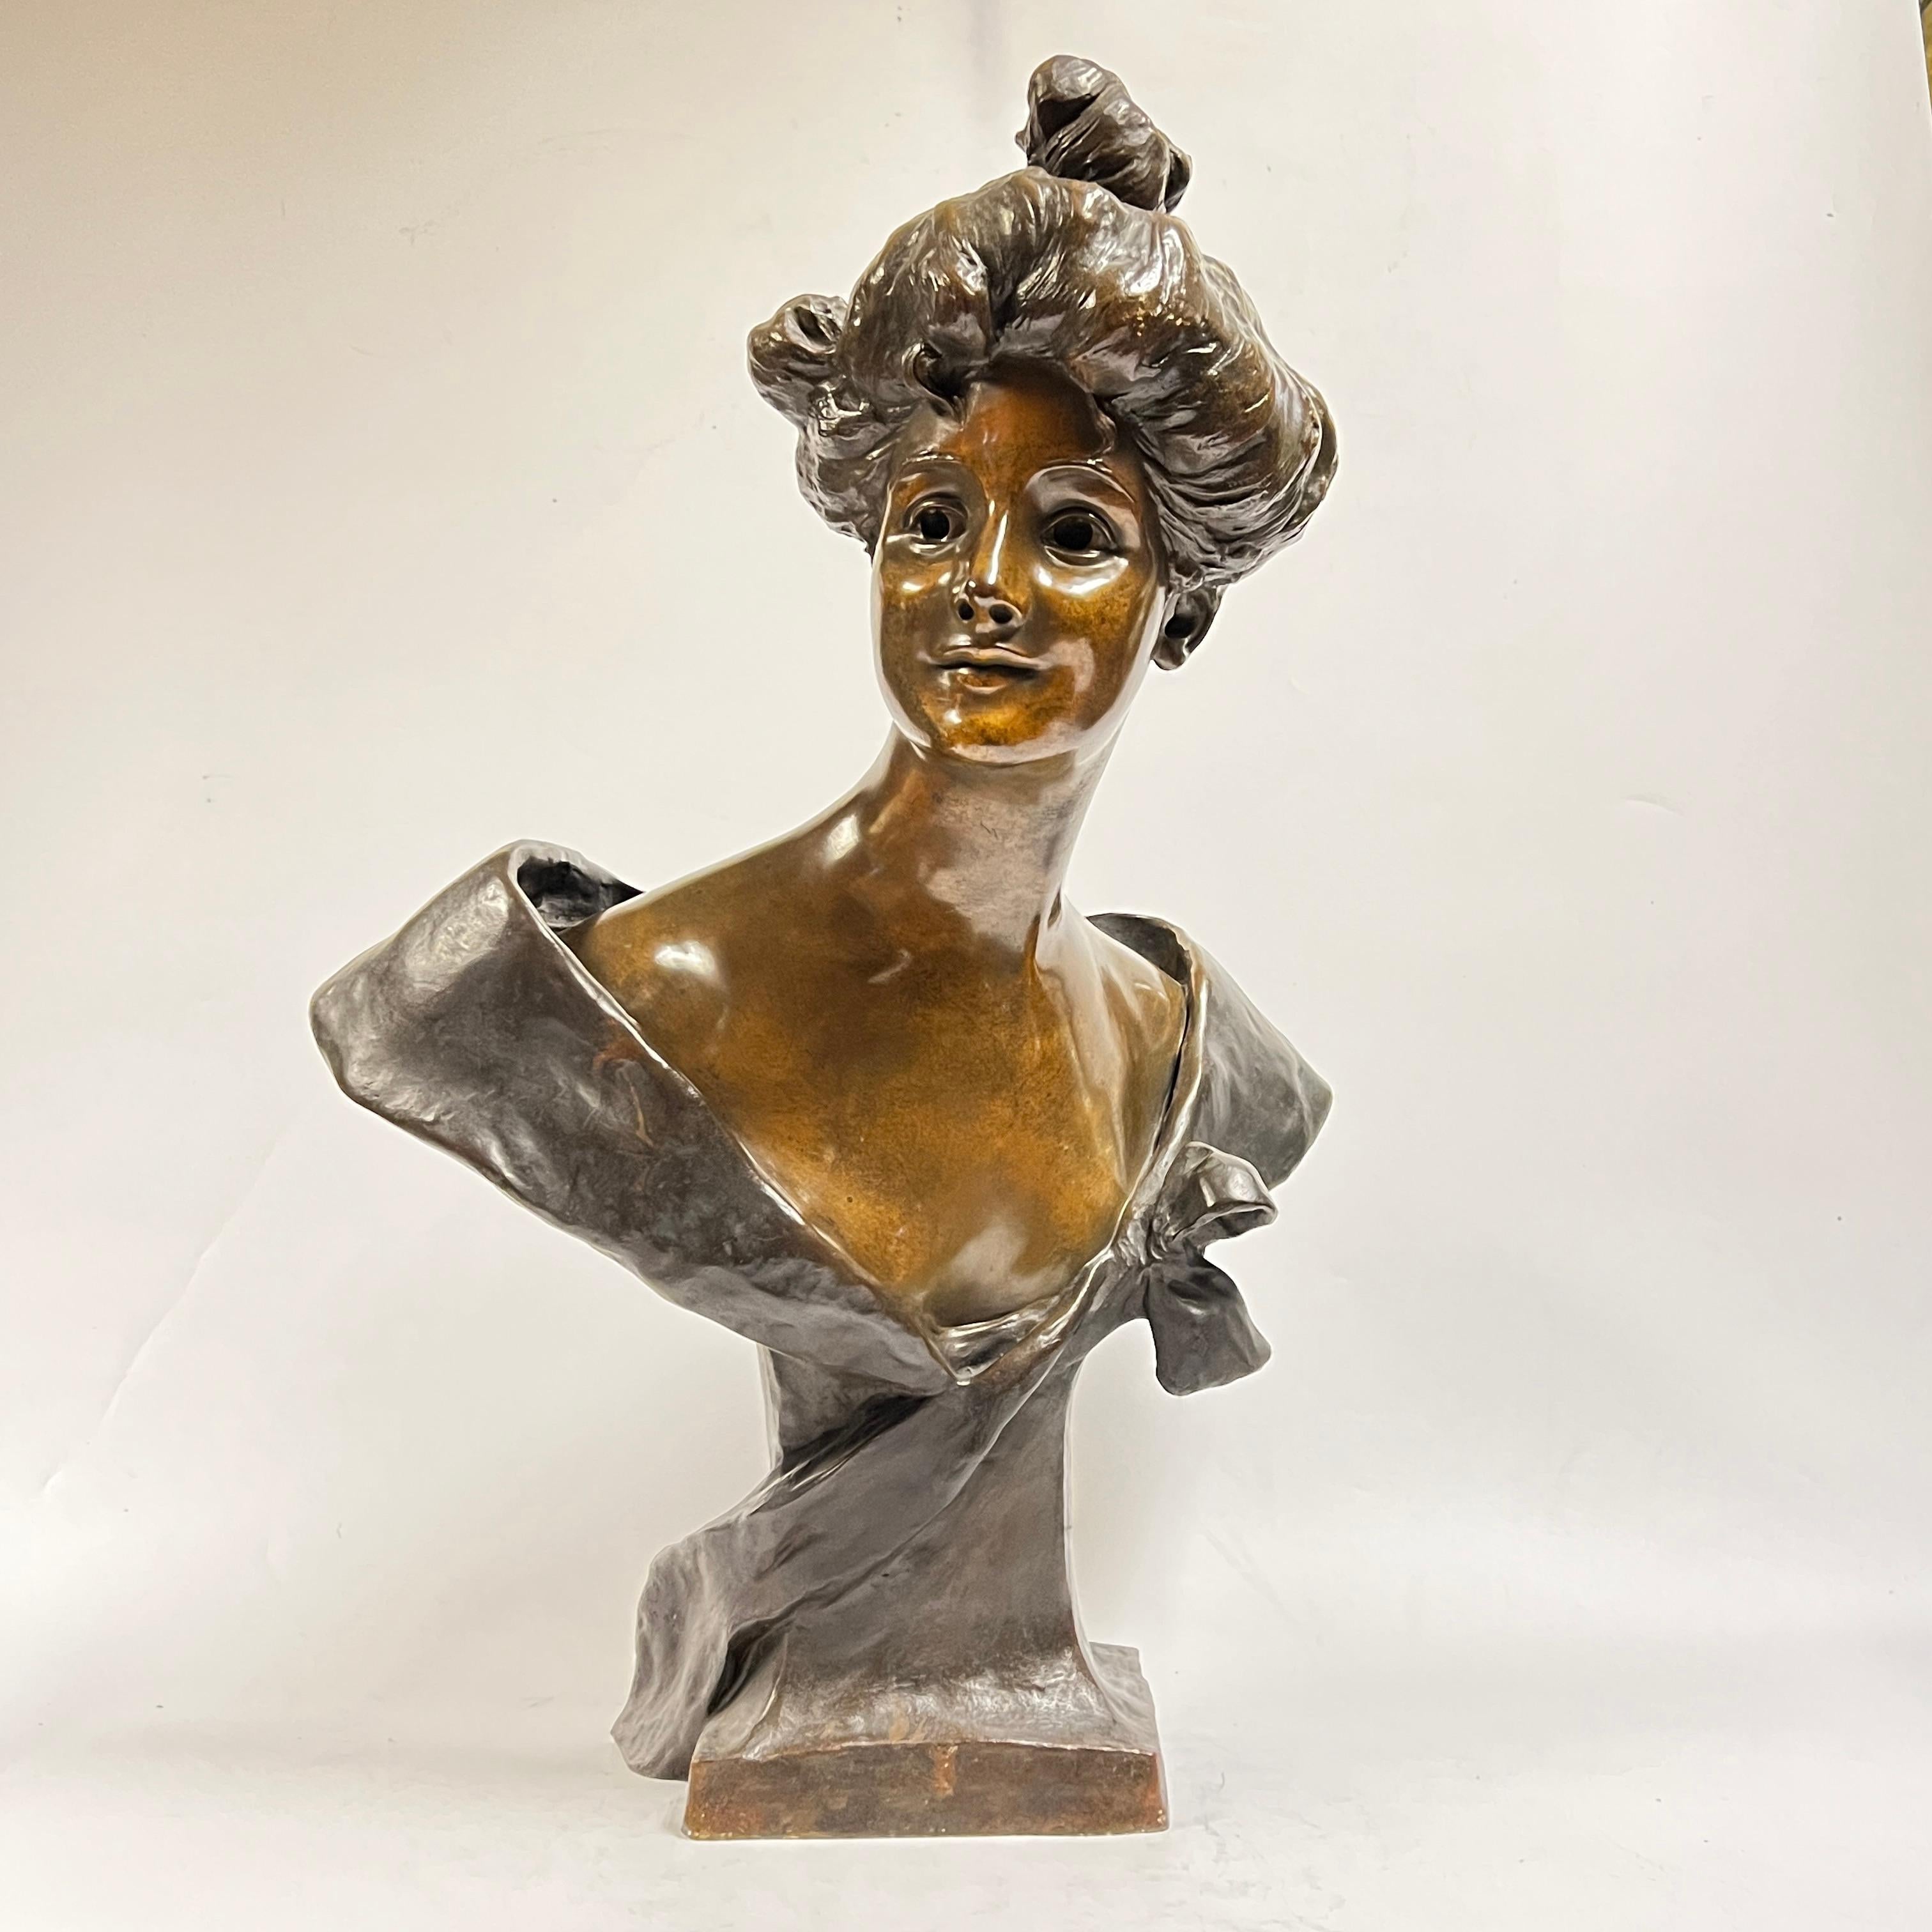 Large Art Nouveau period patinated bronze bust of a lovely female by George van der Straeten (1856-1928).